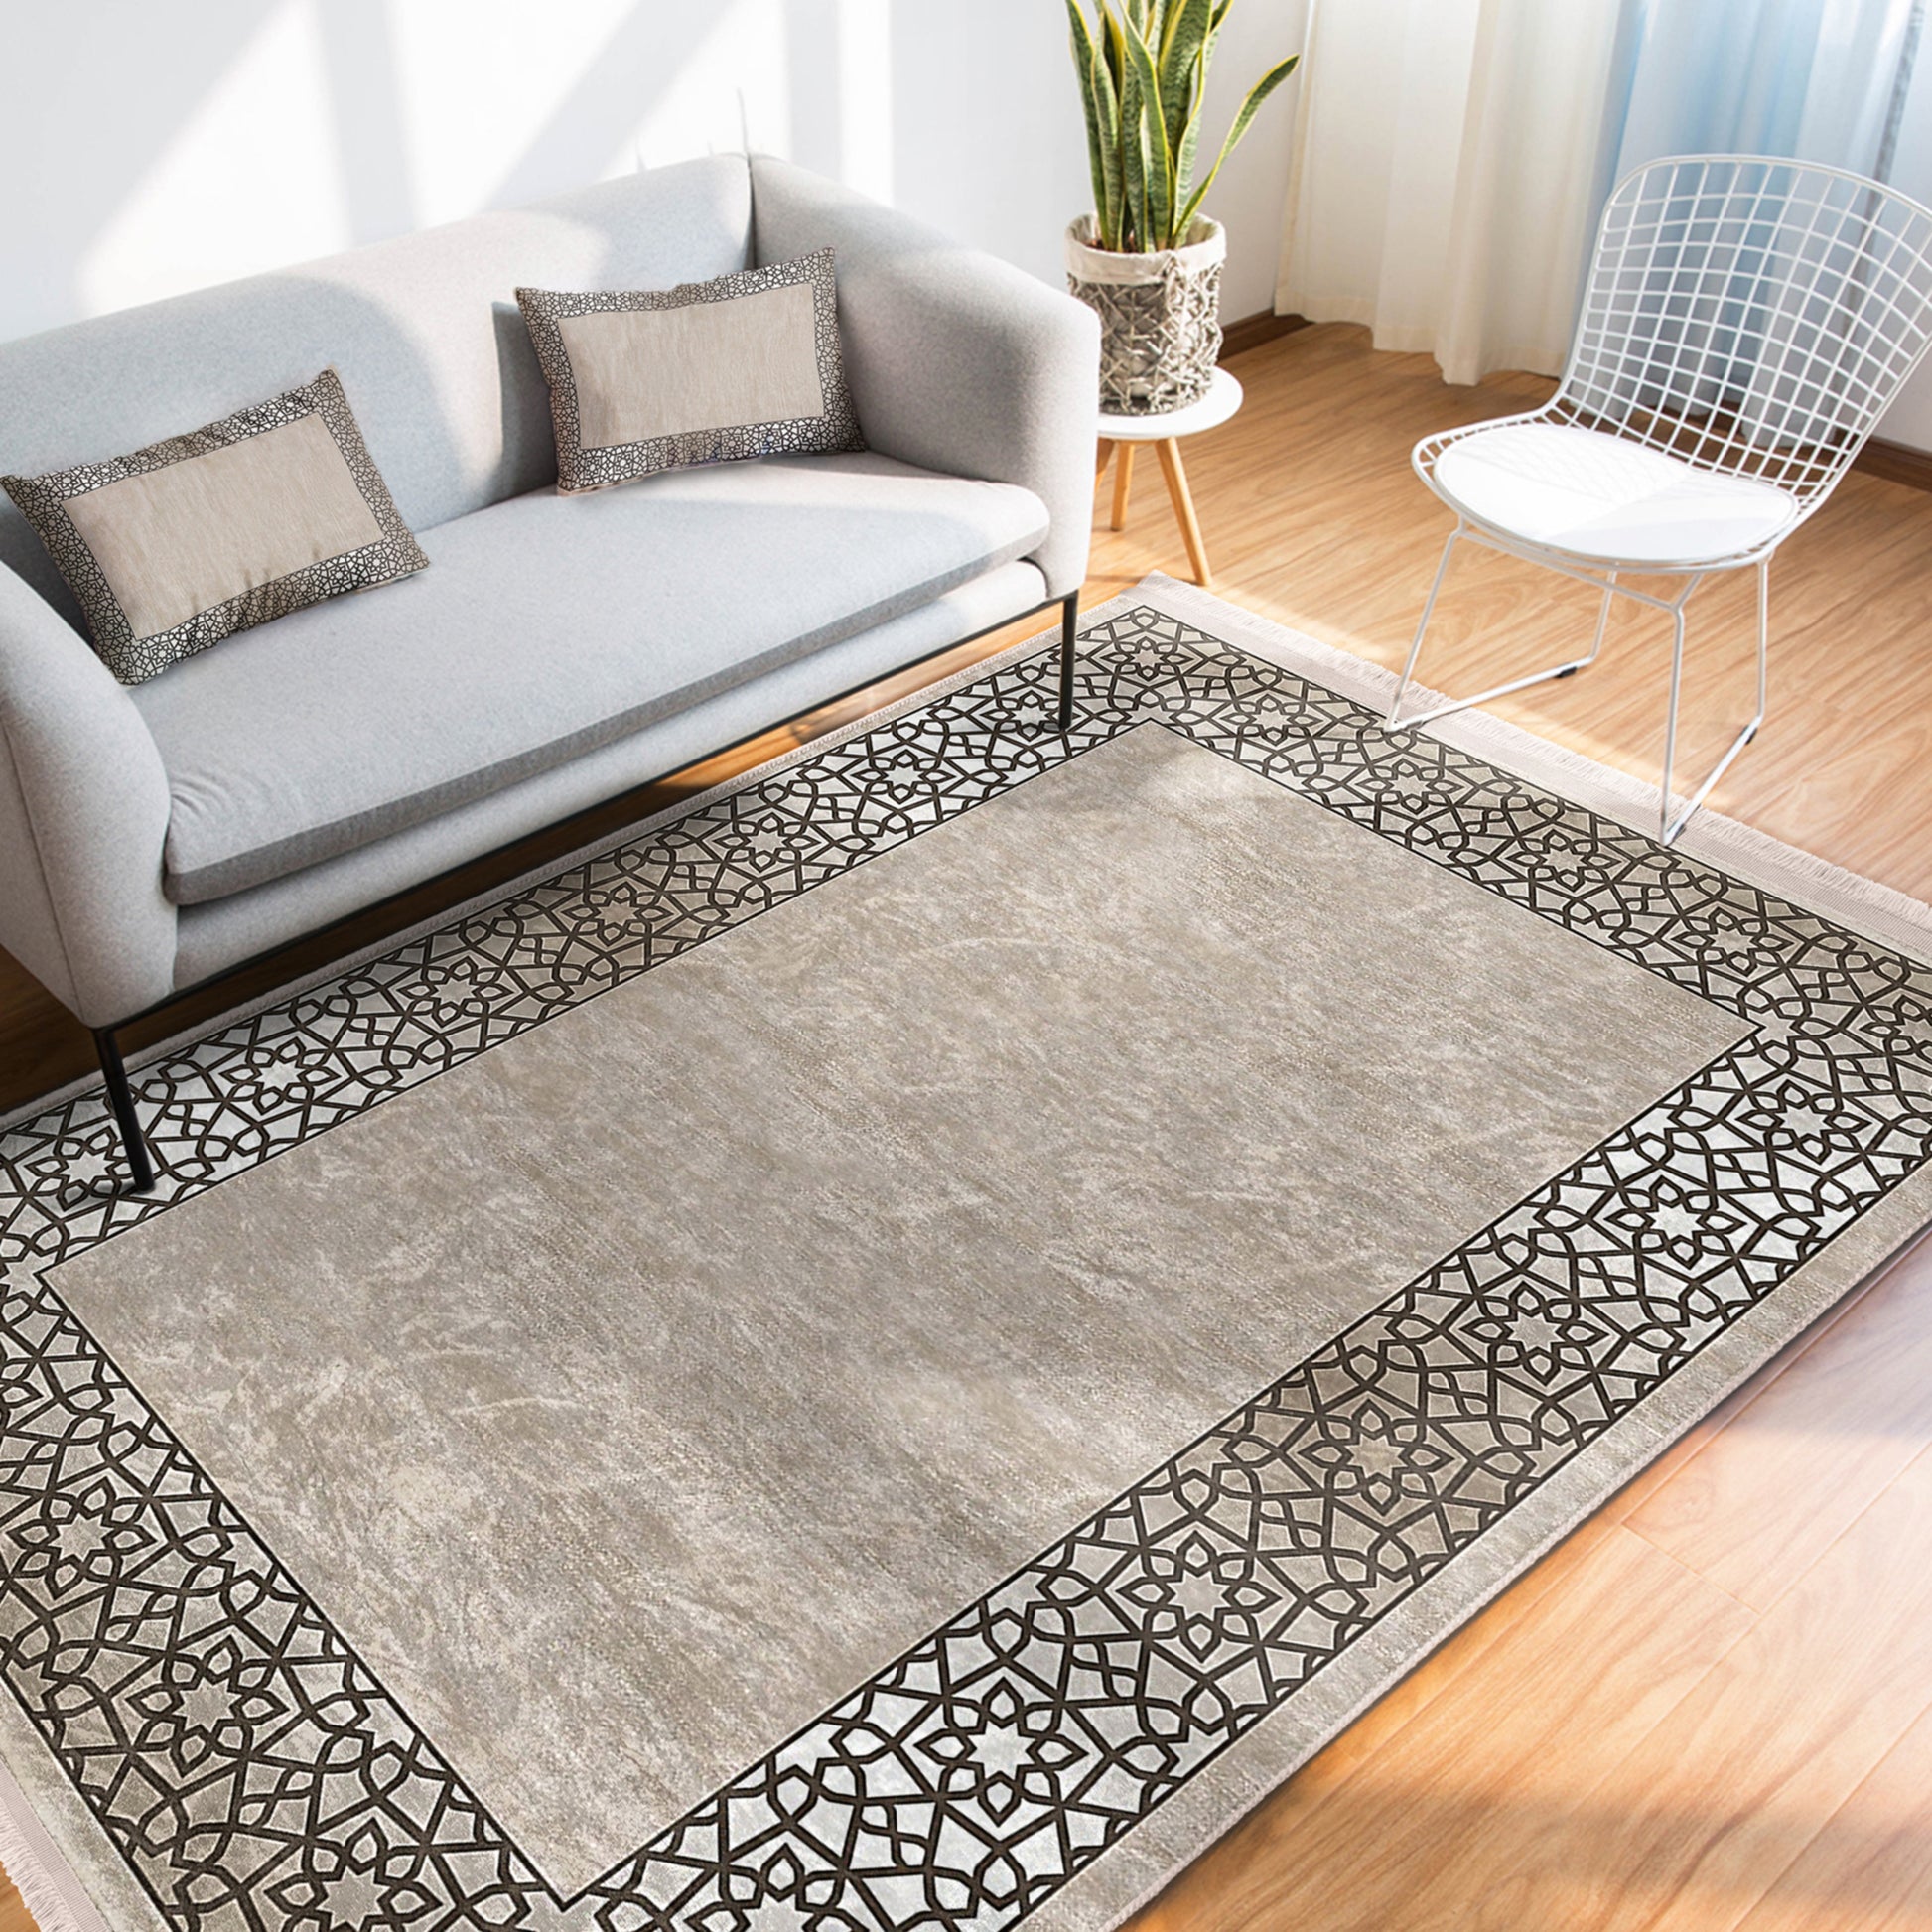 Step into Luxury with our Classic Motifs Washable Area Rug